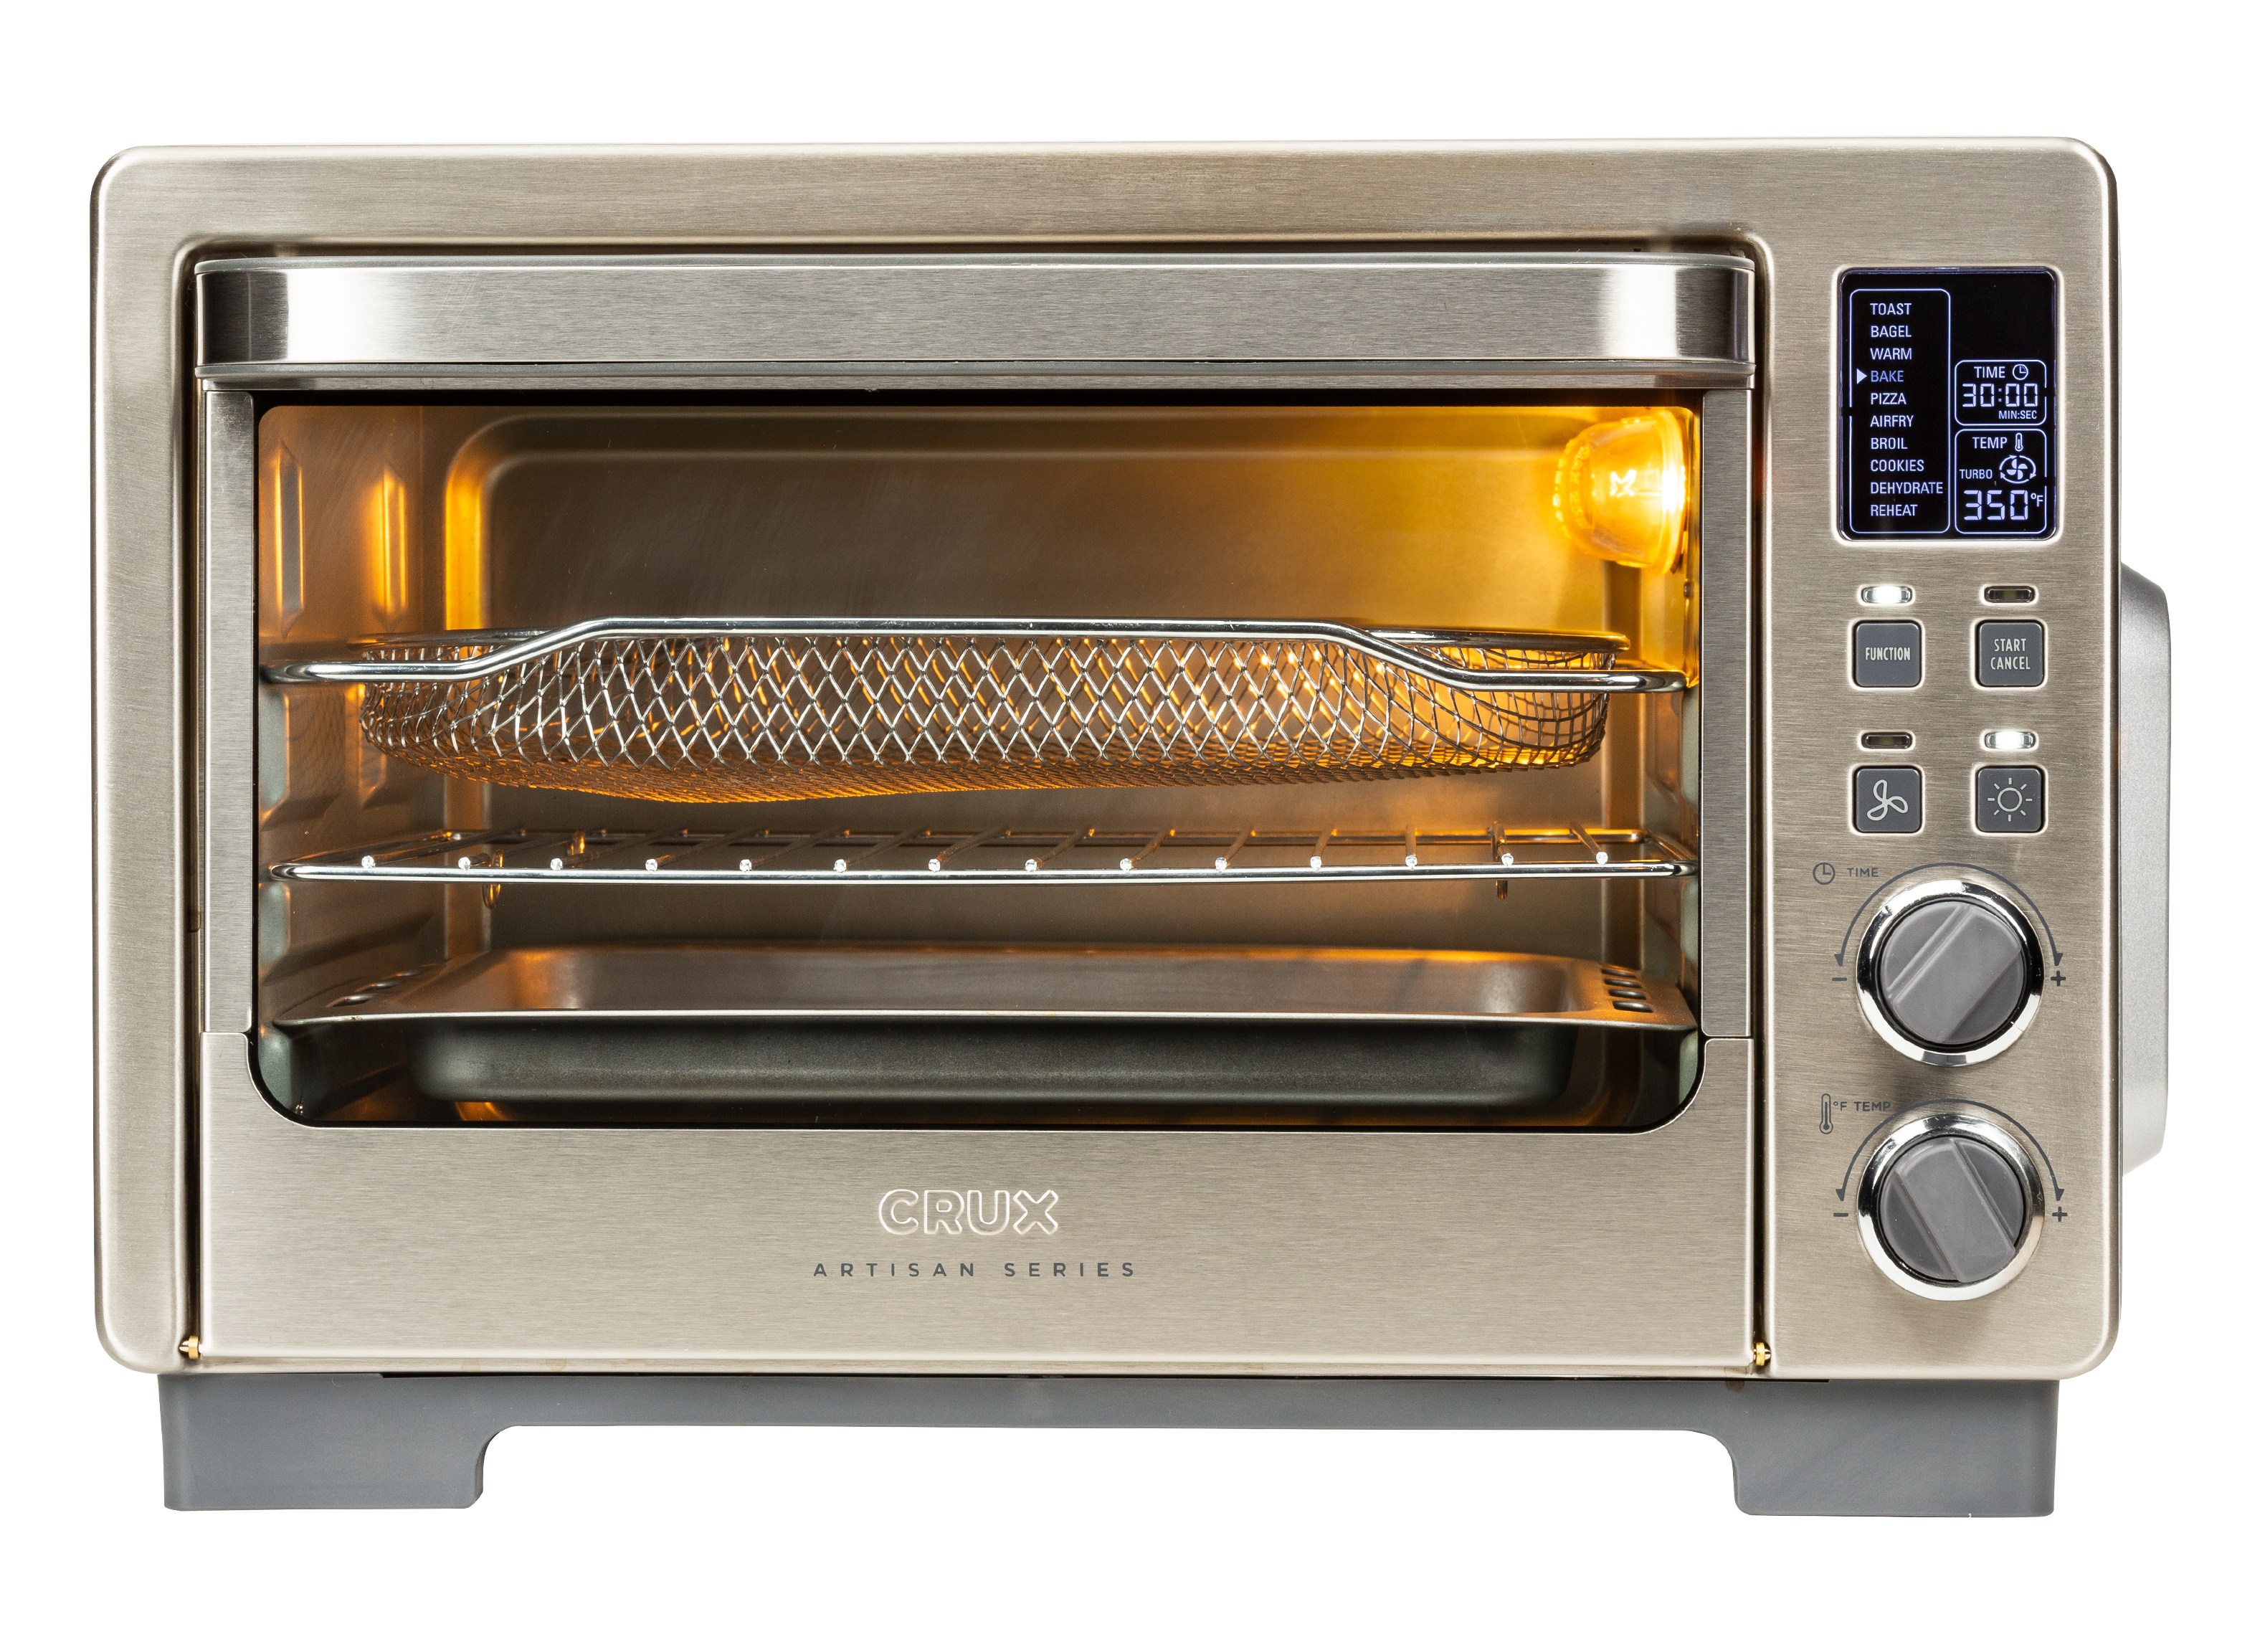 https://crdms.images.consumerreports.org/prod/products/cr/models/404994-toaster-ovens-crux-artisan-series-6-slice-digital-air-frying-model-14934-10025160.png